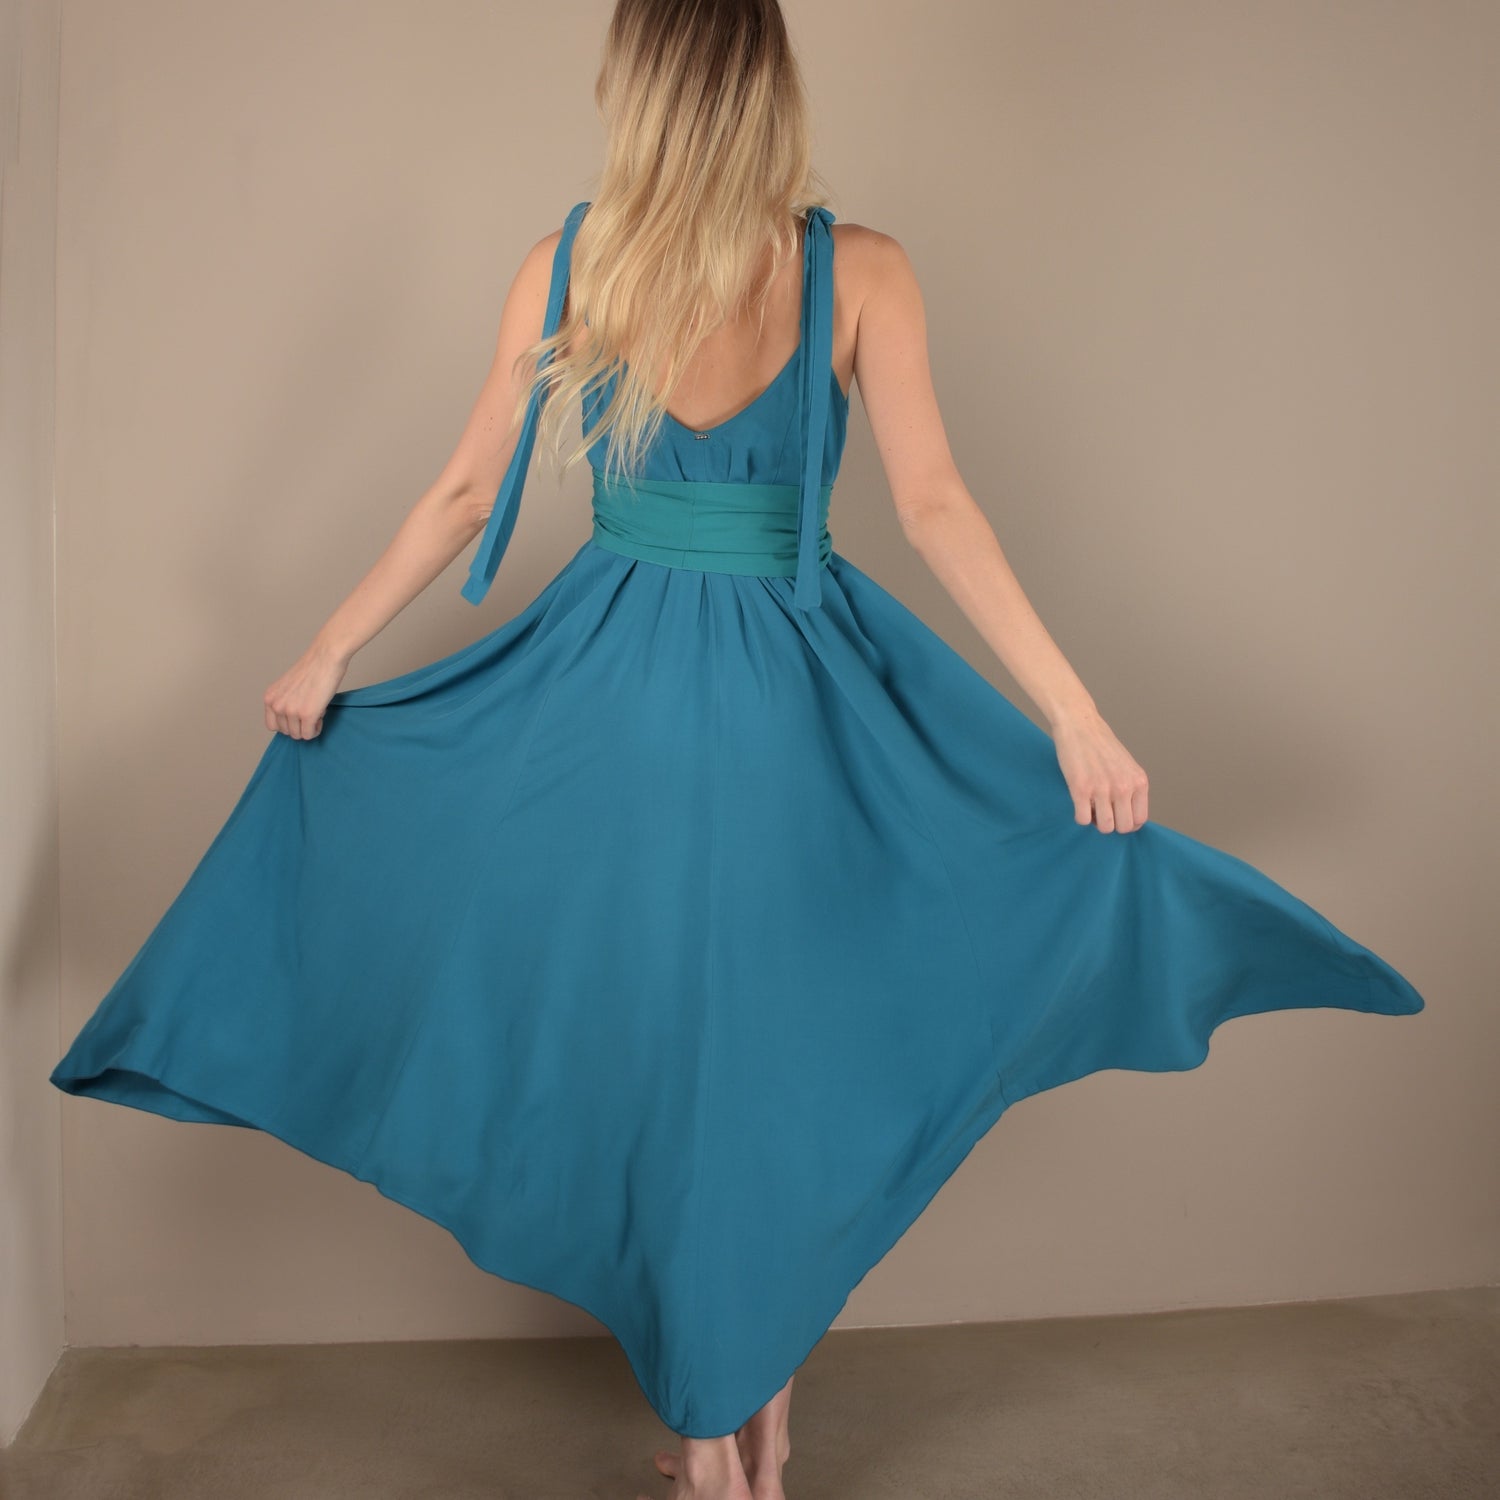 Summer Dress in Deep Blue and Green colors